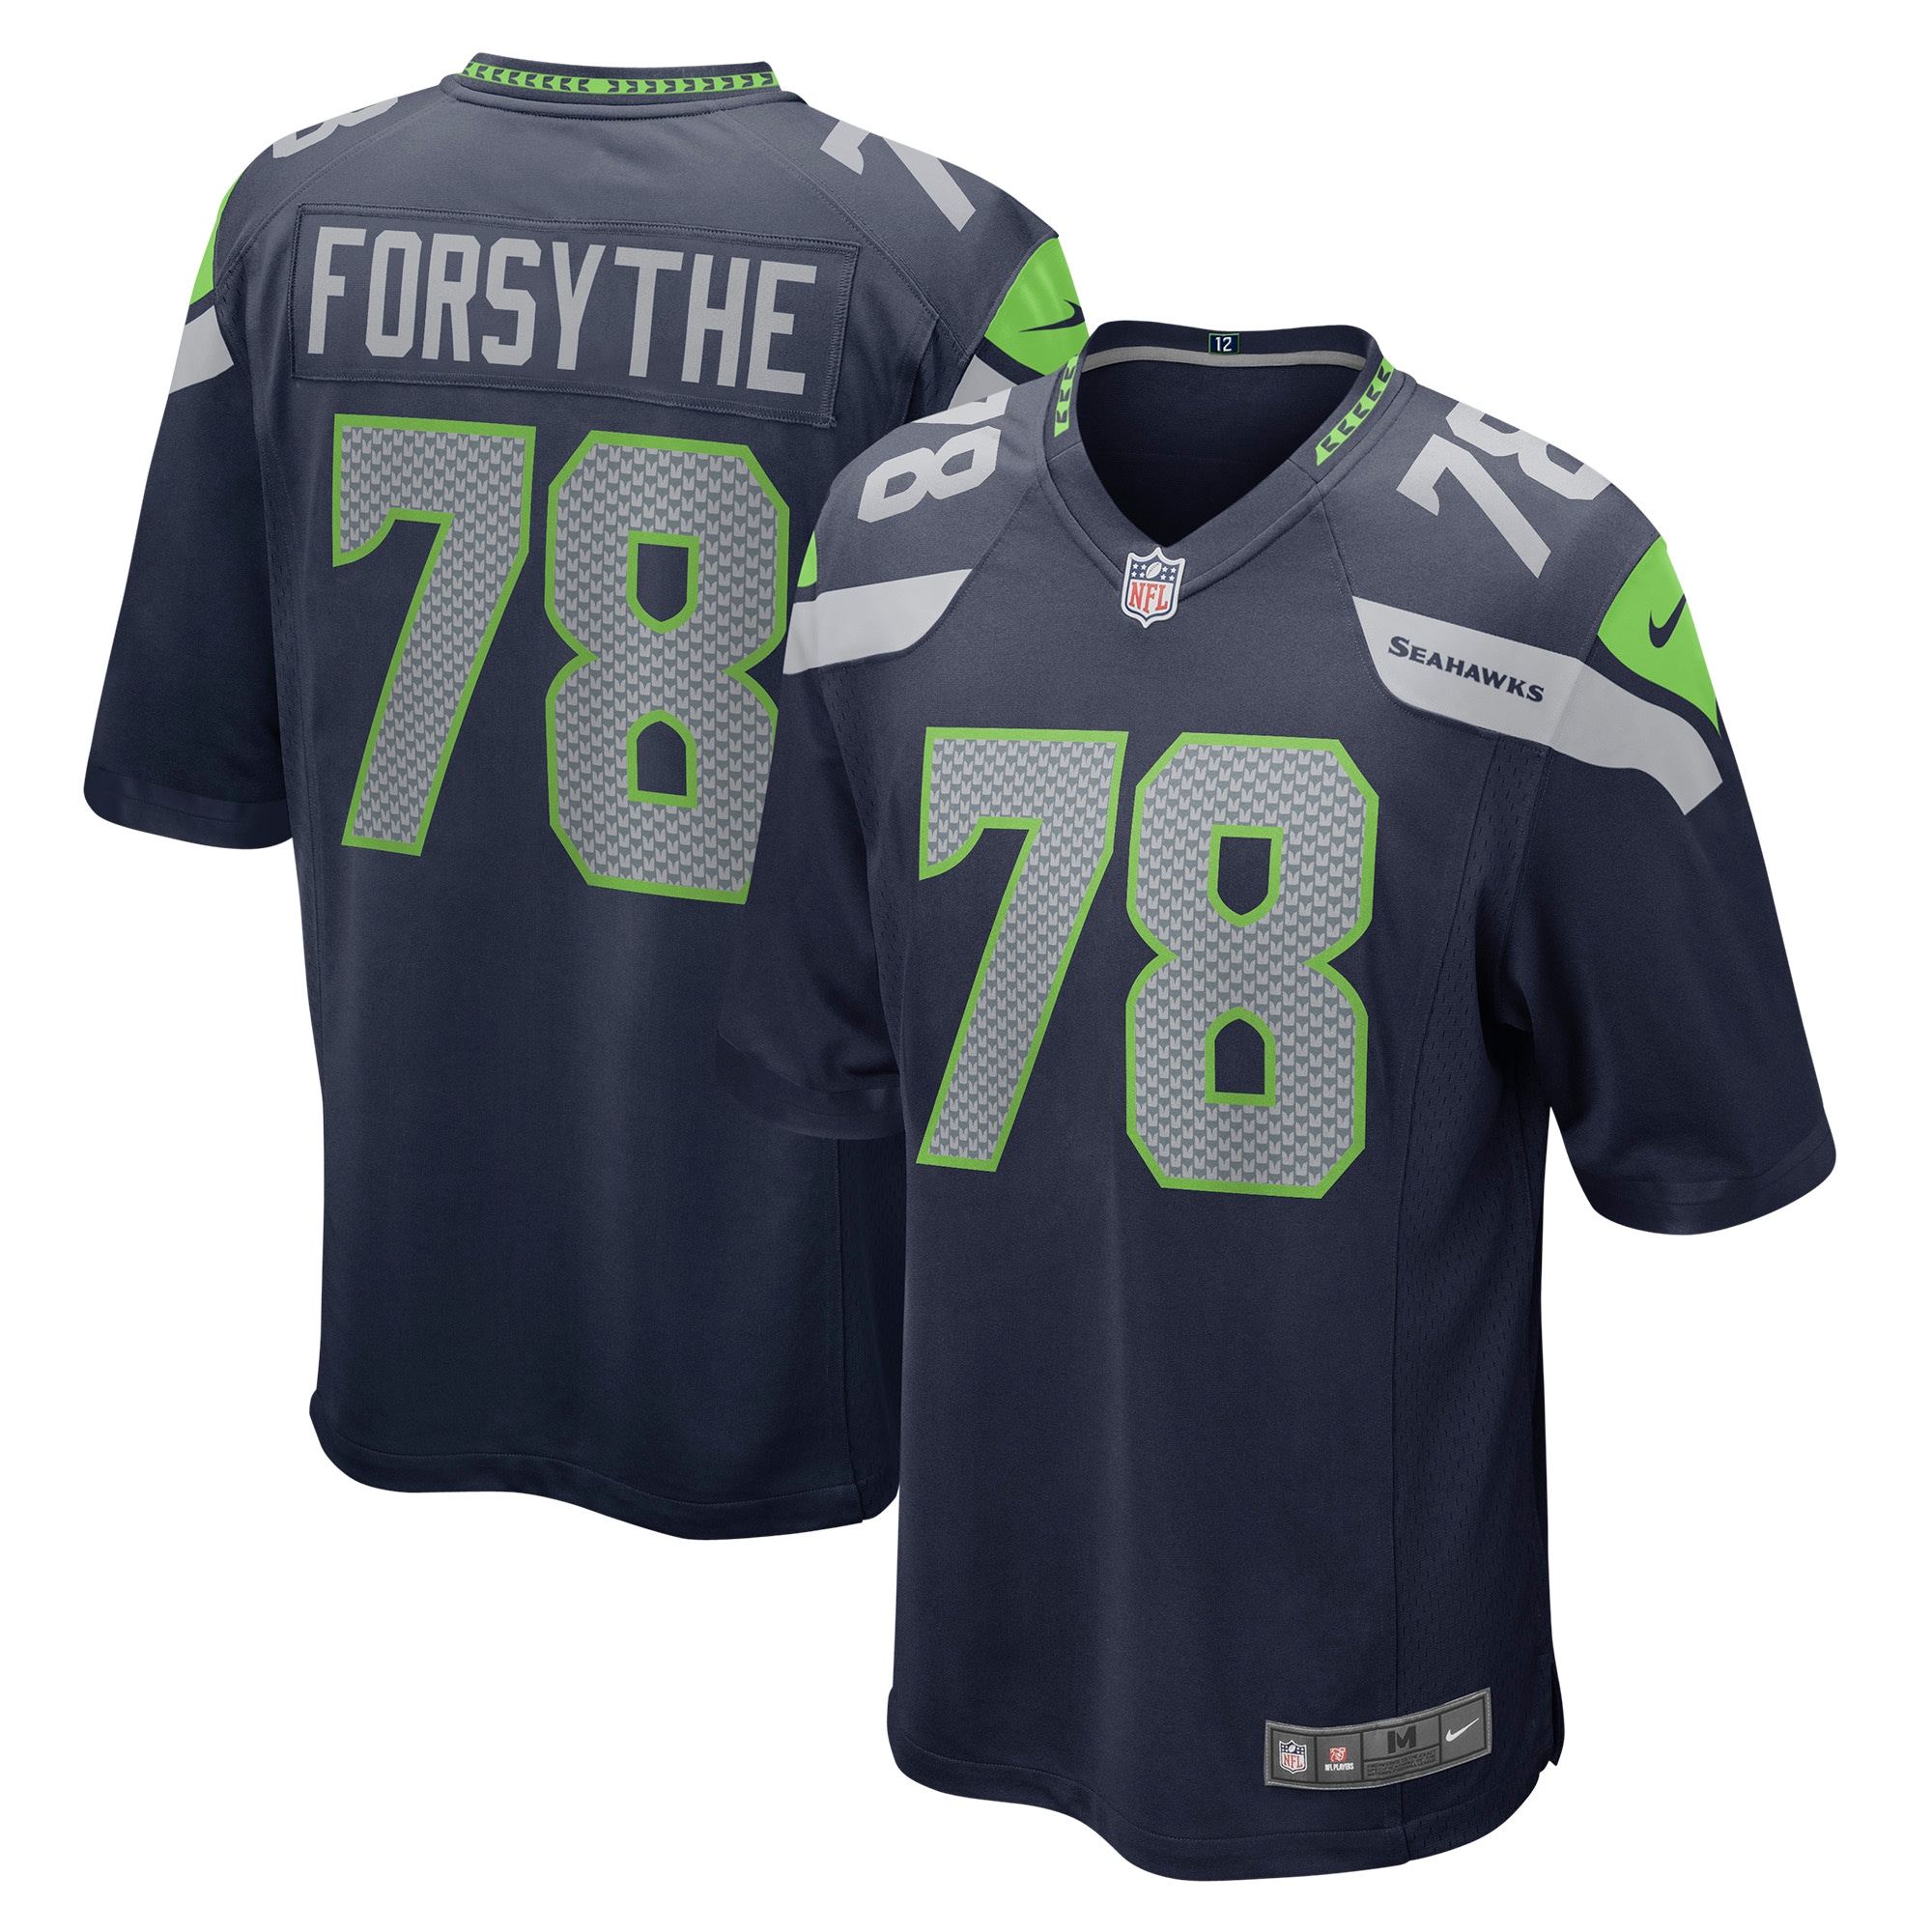 Men's Seattle Seahawks Jerseys College Navy Stone Forsythe Game Style